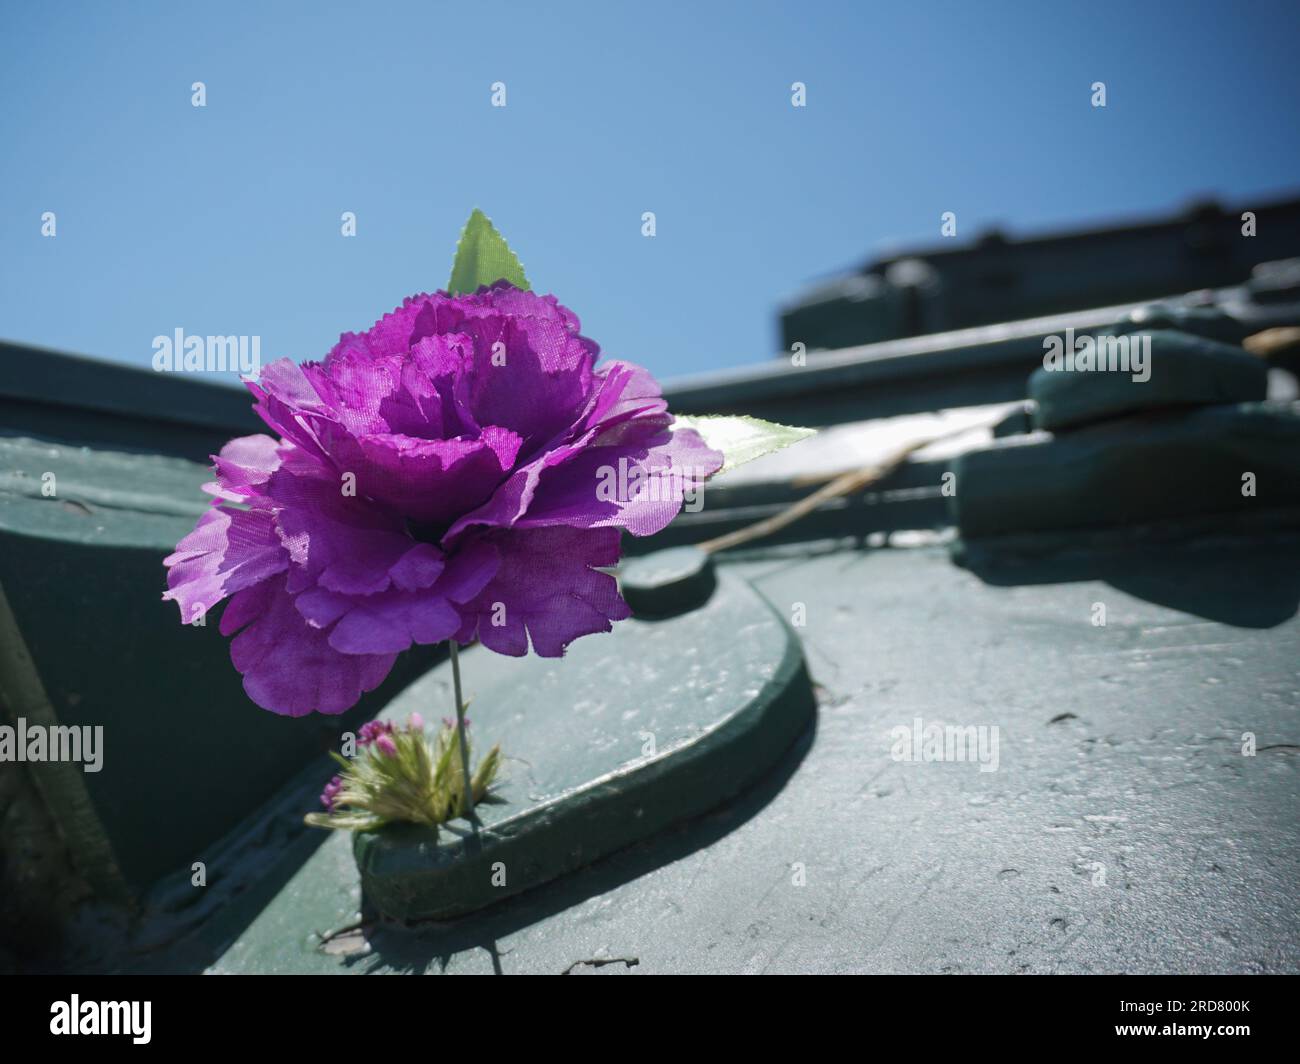 A flower is seen placed on an Azerbaijani tank captured by soldiers from Karabakh. during the First Nagorno-Karabakh War in 1988. The tank is considered a victory for Karabakh and now situated outside the town of Shusha, Nagorno-Karabakh. The unrecognised yet de facto independent country in South Caucasus, Nagorno-Karabakh (also known as Artsakh) has been in the longest-running territorial dispute between Azerbaijan and Armenia in post-Soviet Eurasia since the collapse of Soviet Union. It is mainly populated by ethnic Armenians. Stock Photo